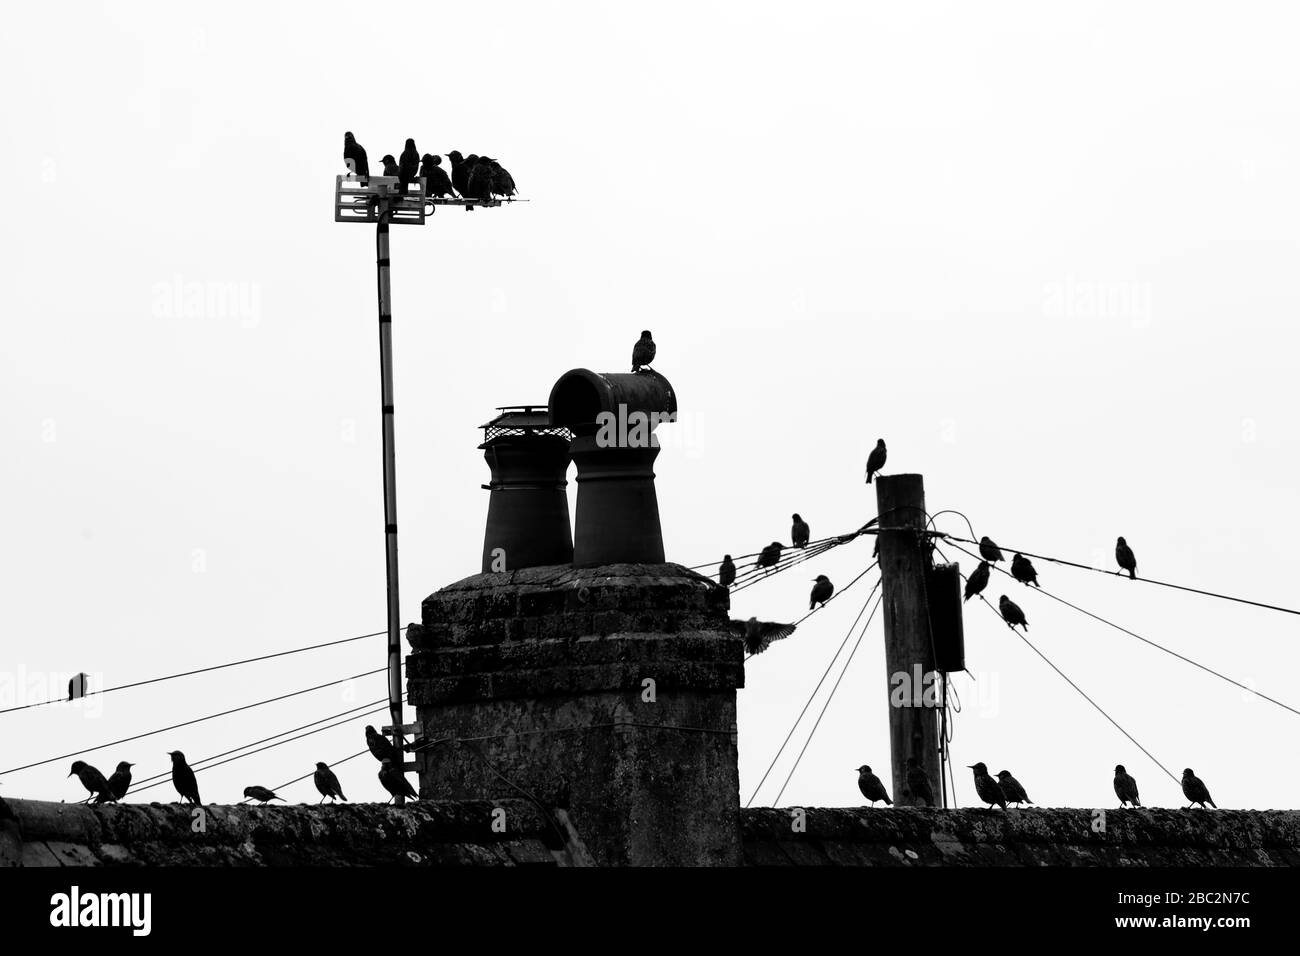 Black and white load of birds stand on the house roof Stock Photo